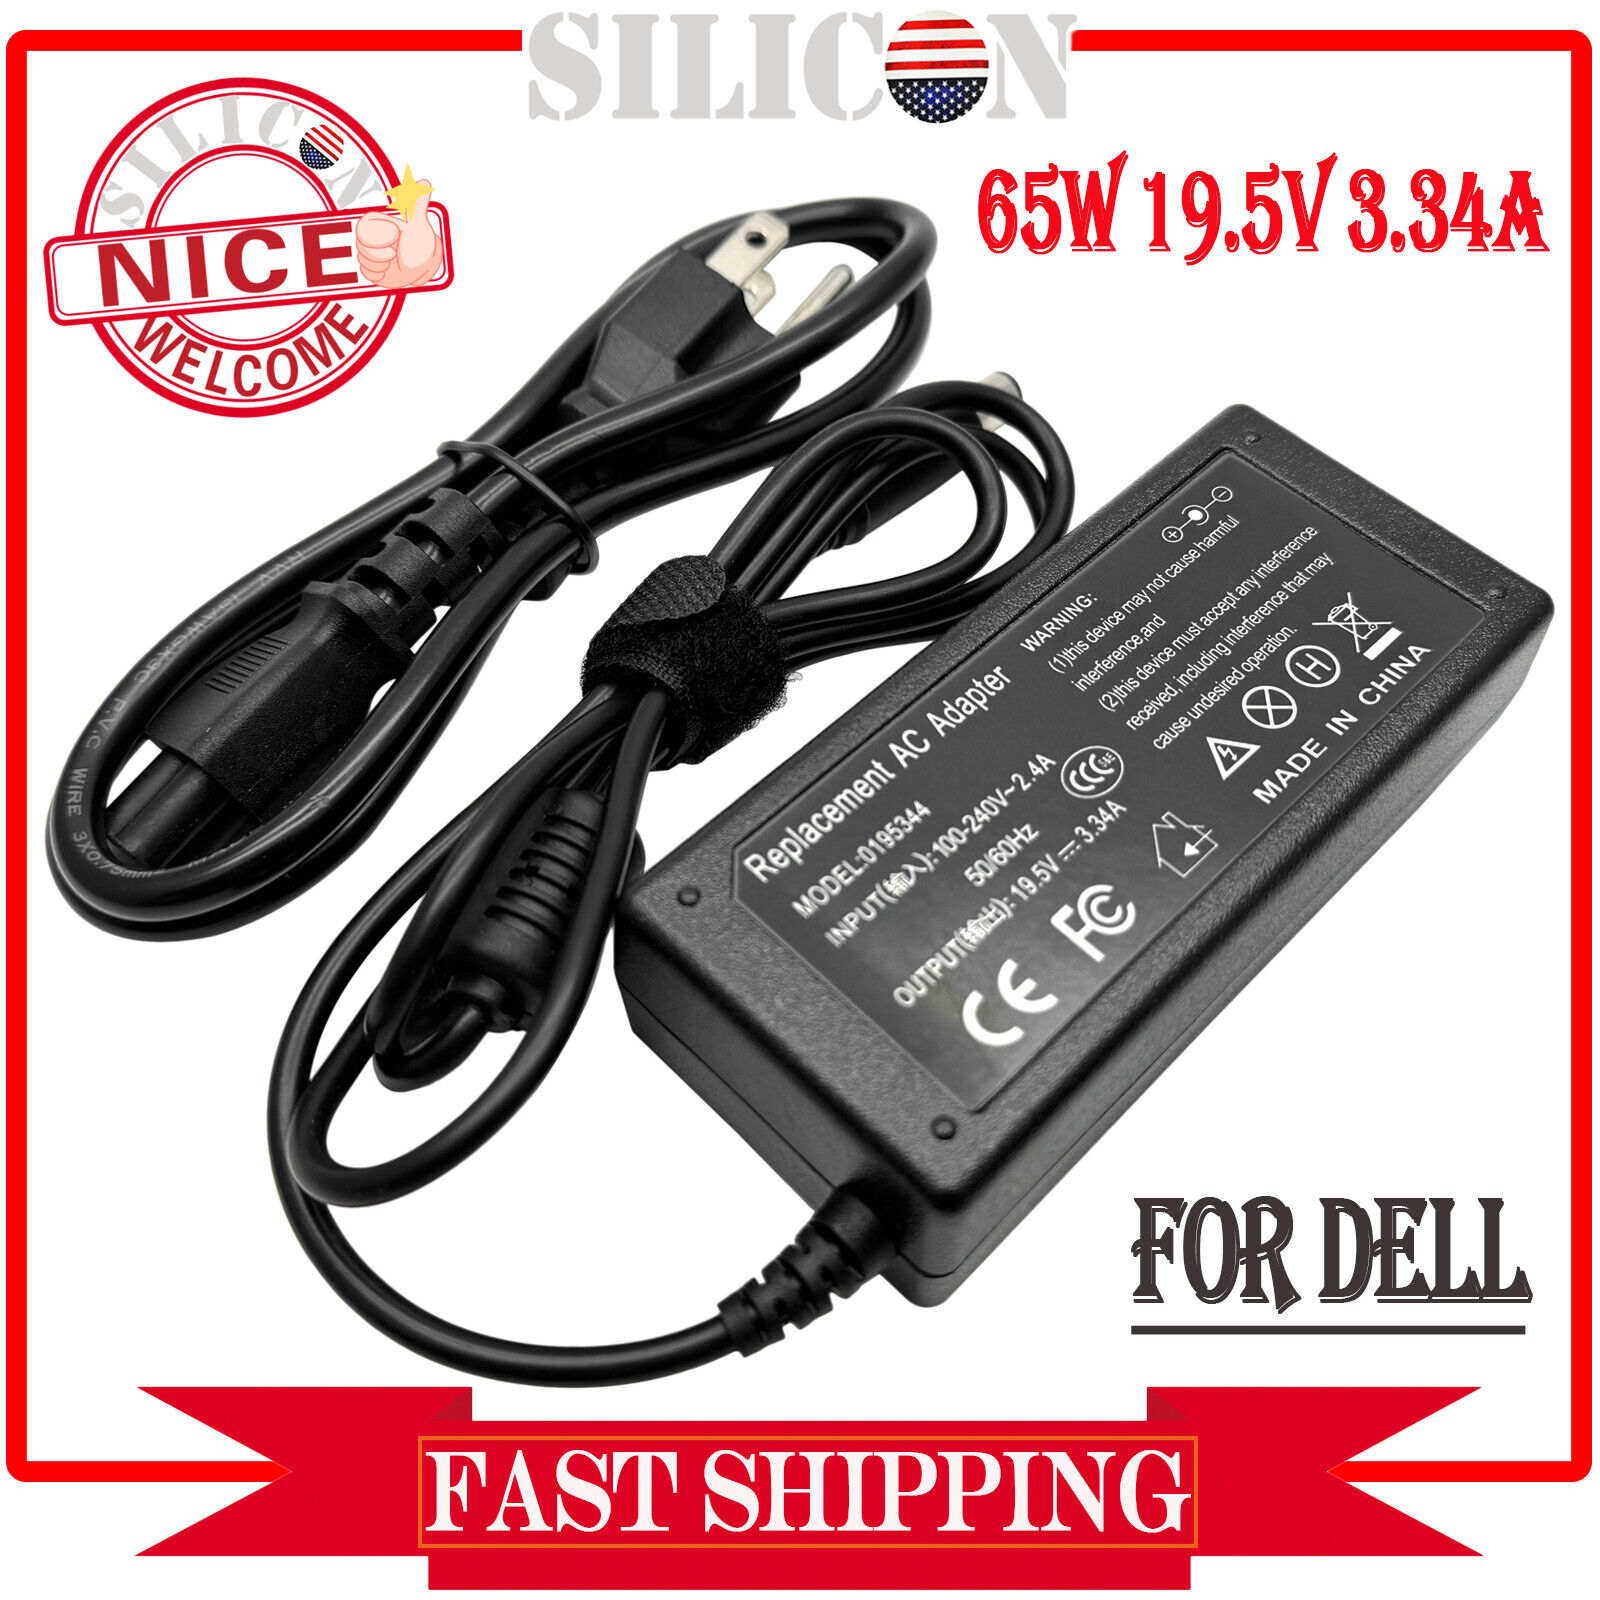 AC Adapter Charger Power Cord For Dell Inspiron 15-3542 15-3537 15-7537 15z-5523